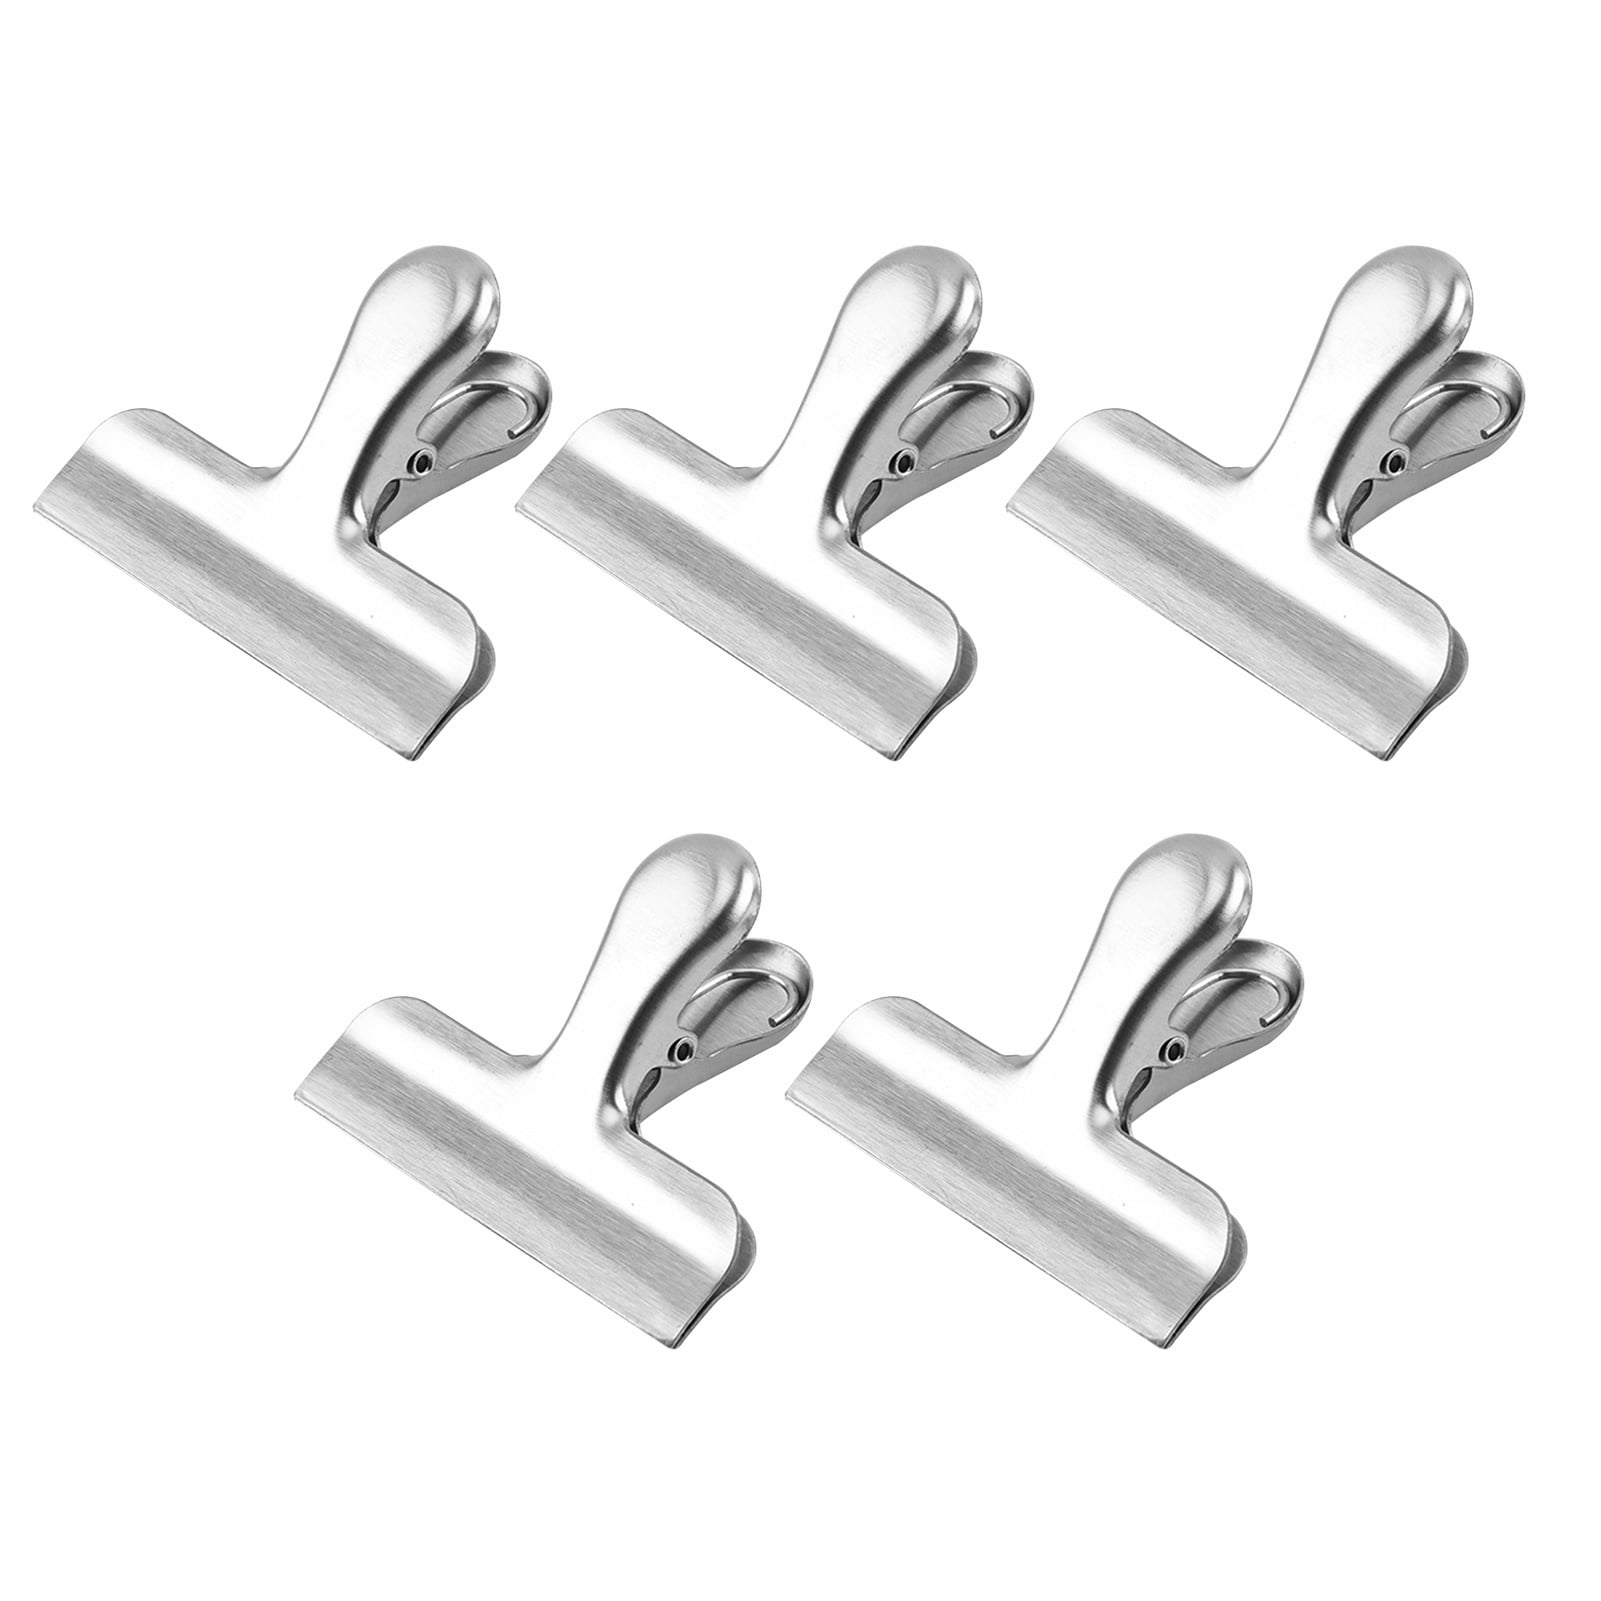 5Pcs-Bag Clips Stainless Steel Heavy-Duty Food Bag Clips Durable Trendy Flash 